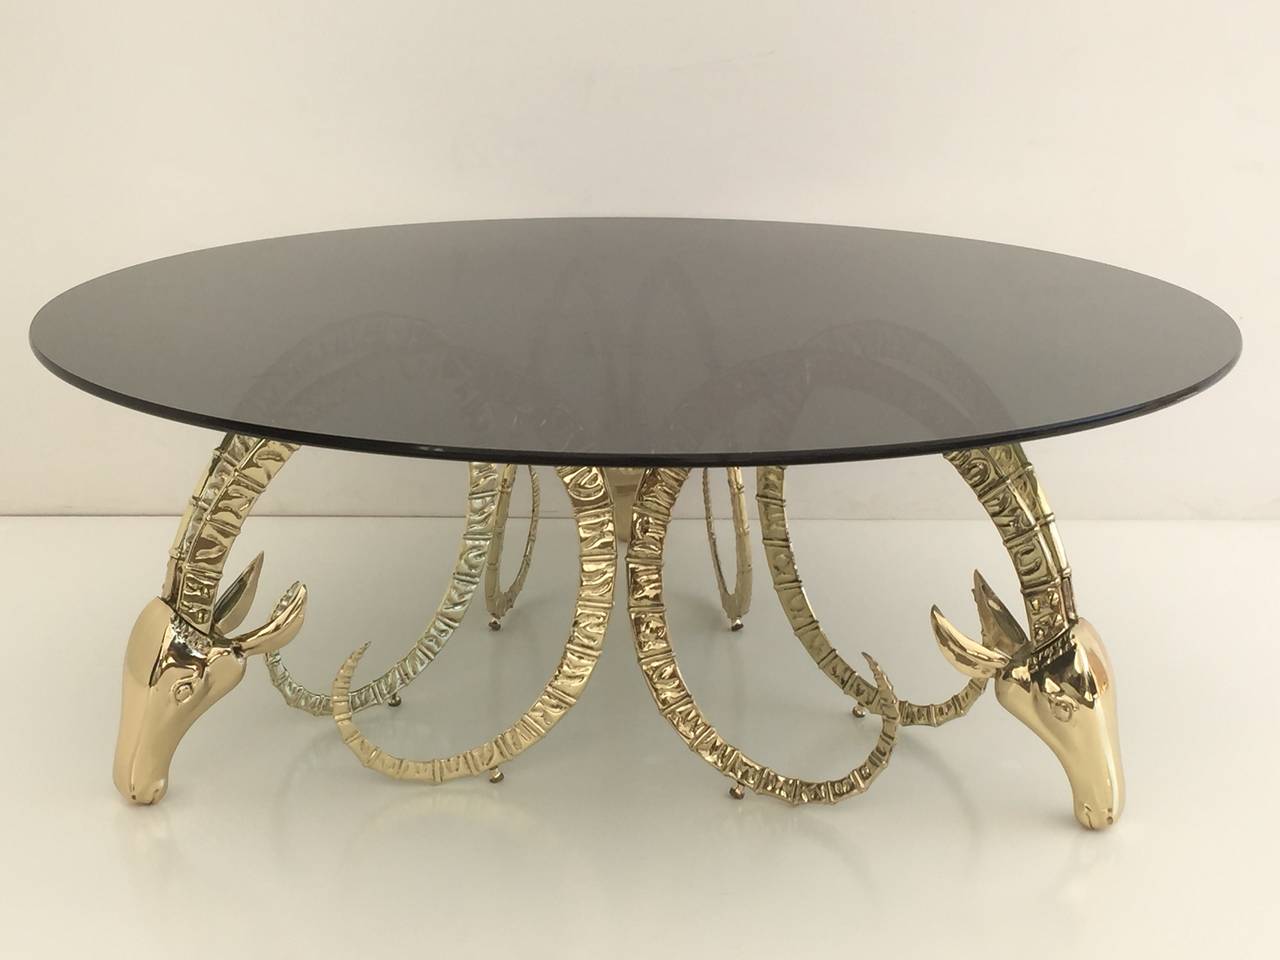 Brass ibex coffee table in the style of Chervet
Each base is about 17.5